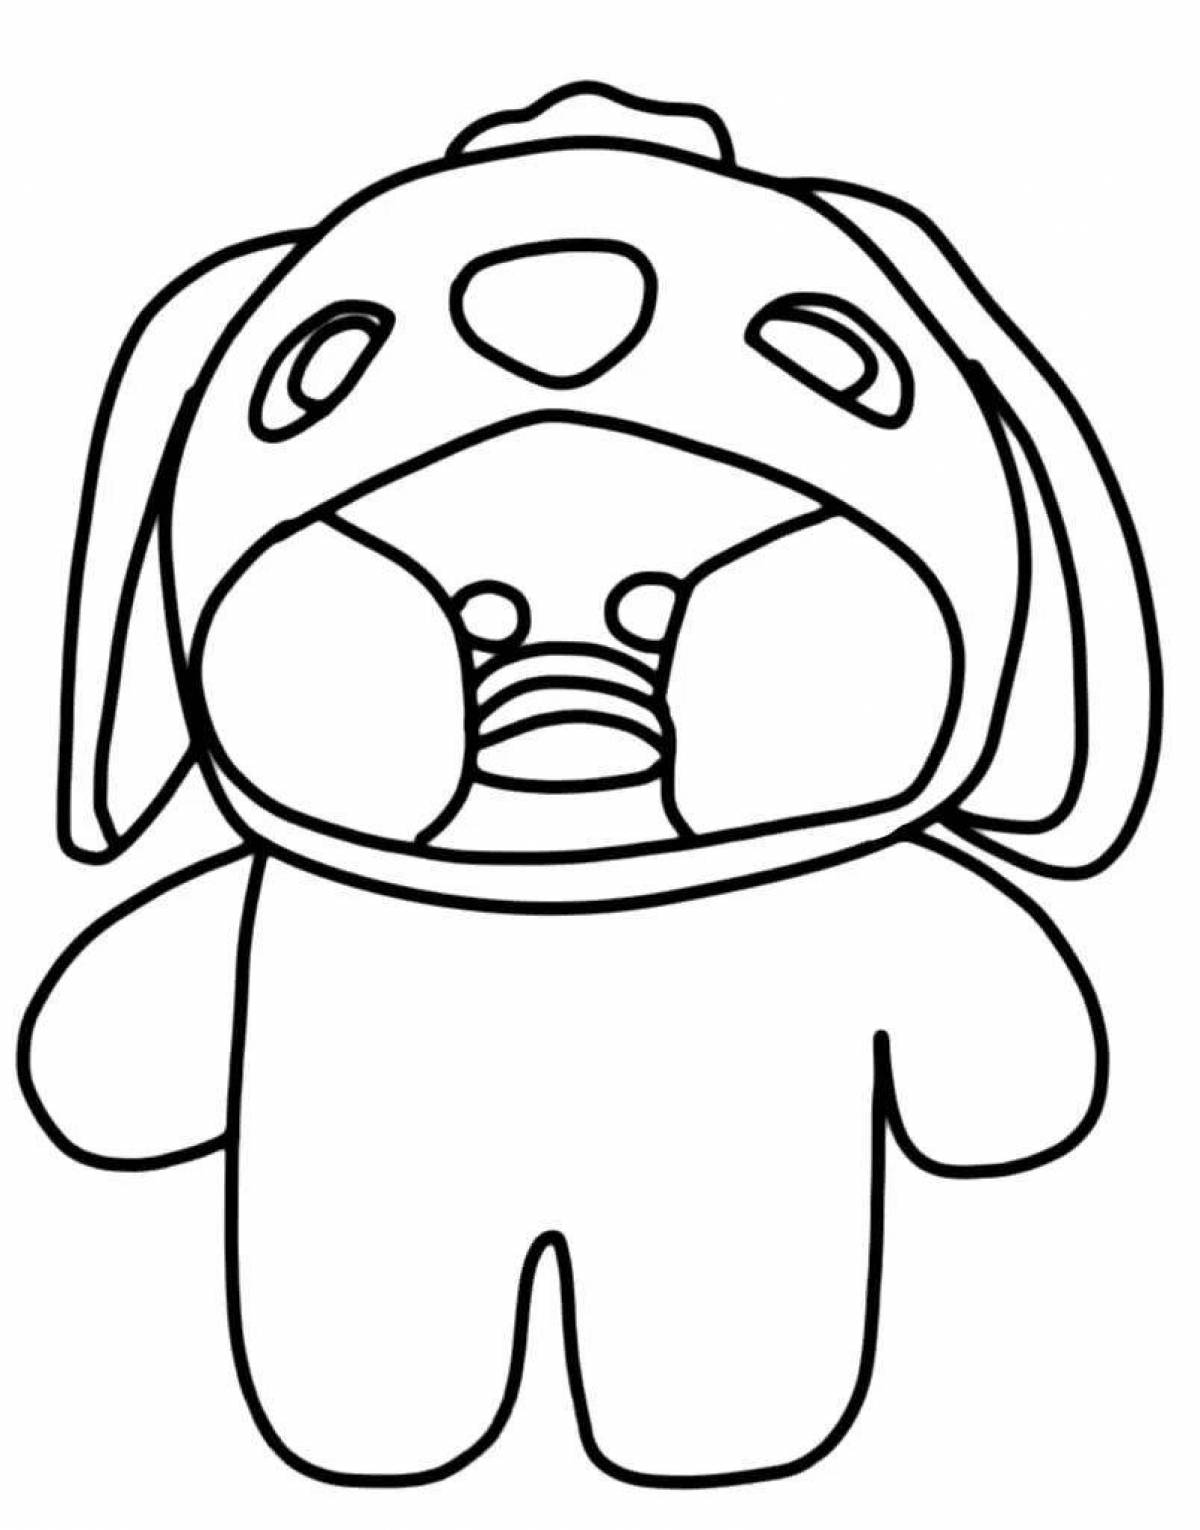 Lalafanfan big duck coloring page